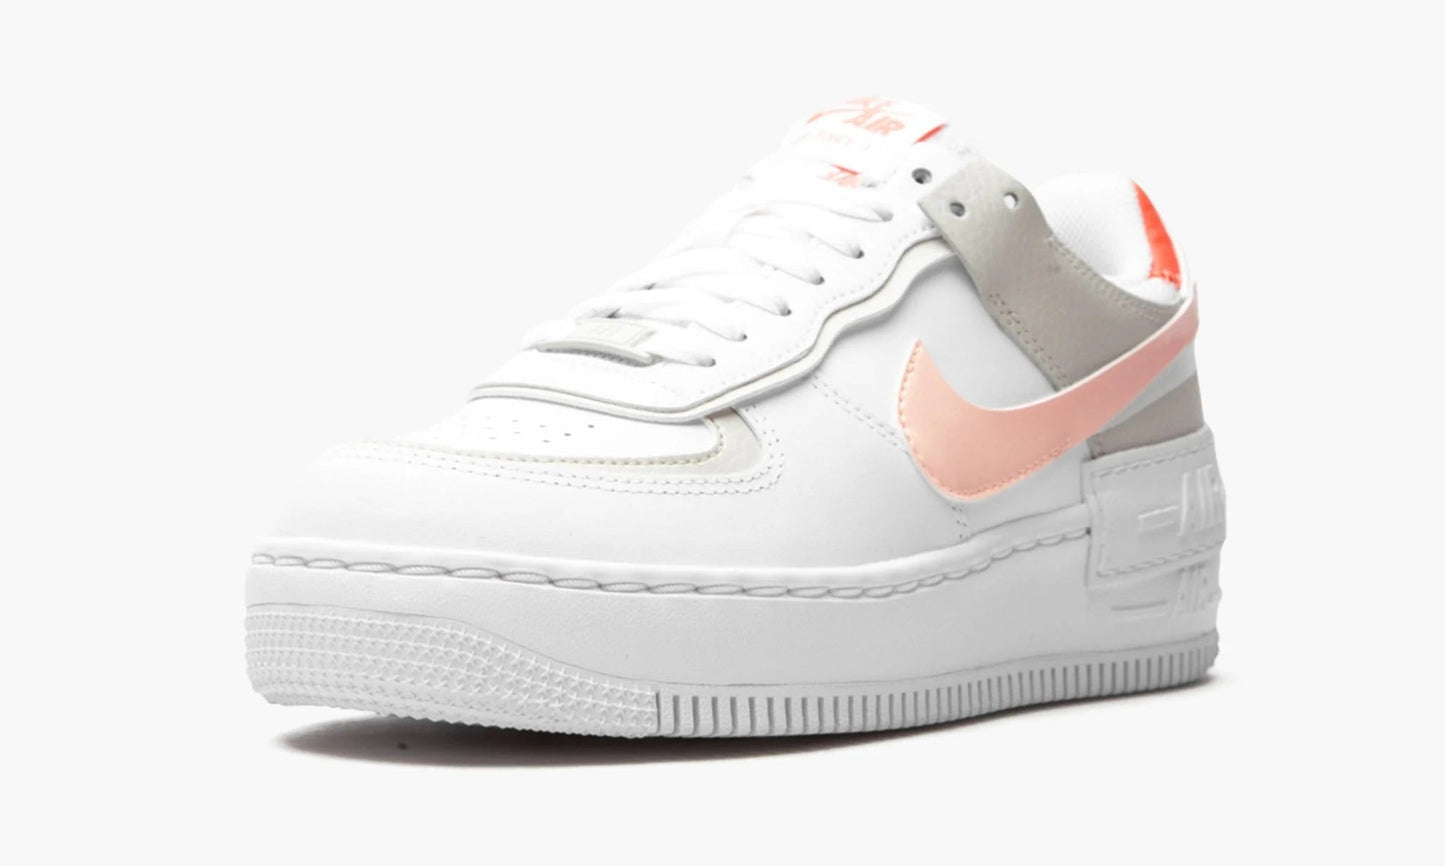 Air Force 1 Low Shadow Crimson Tint - DH3896 100 | The Sortage